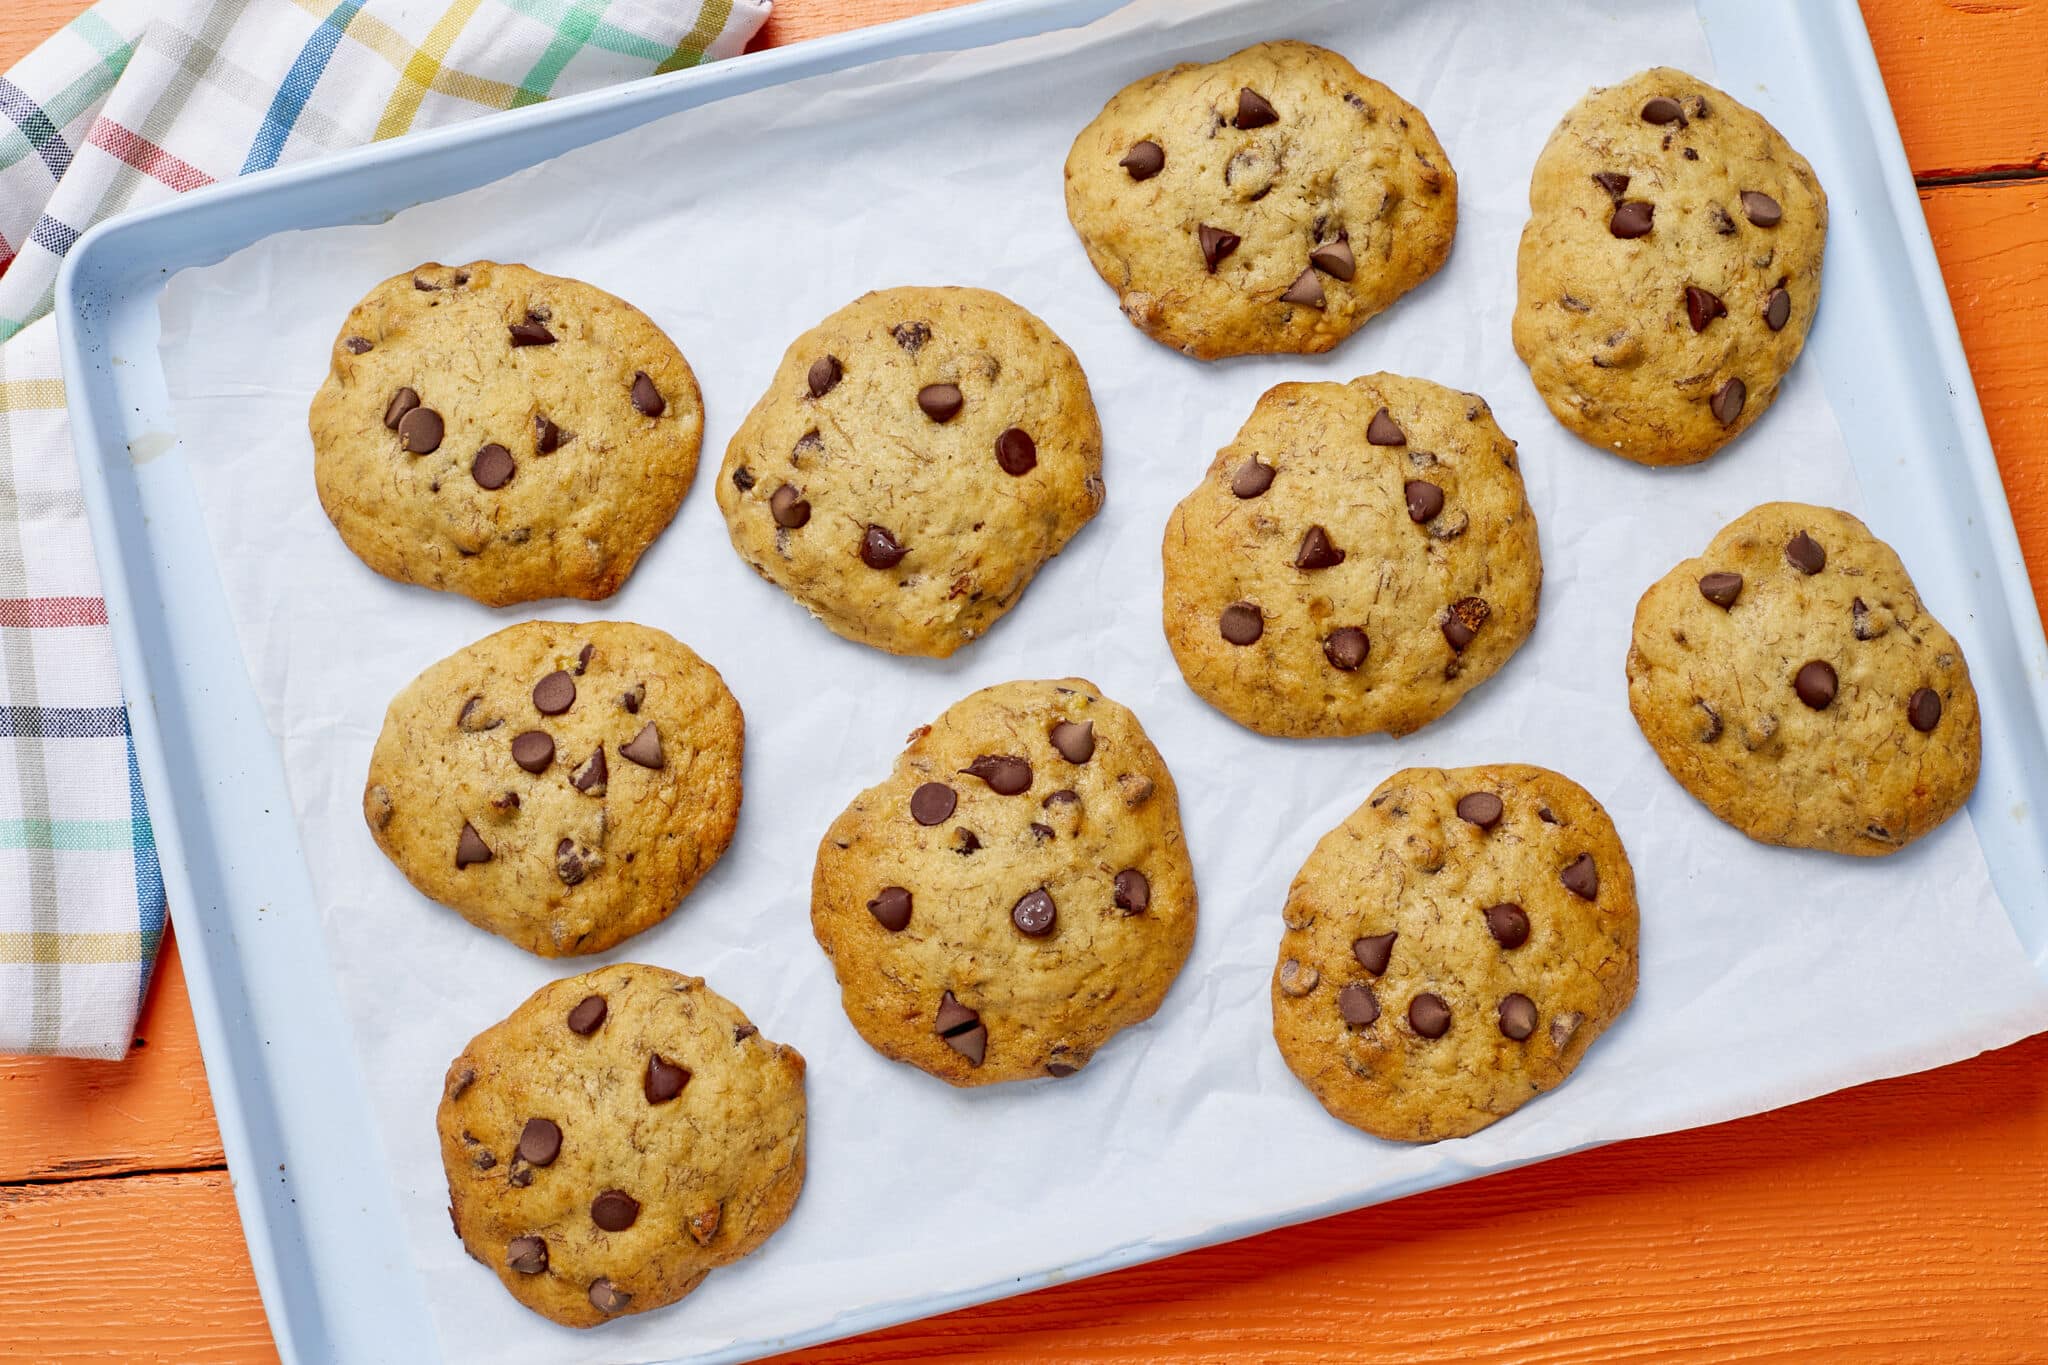 Banana Bread Chocolate Chip cookies are golden brown and loaded with chocolate chips.